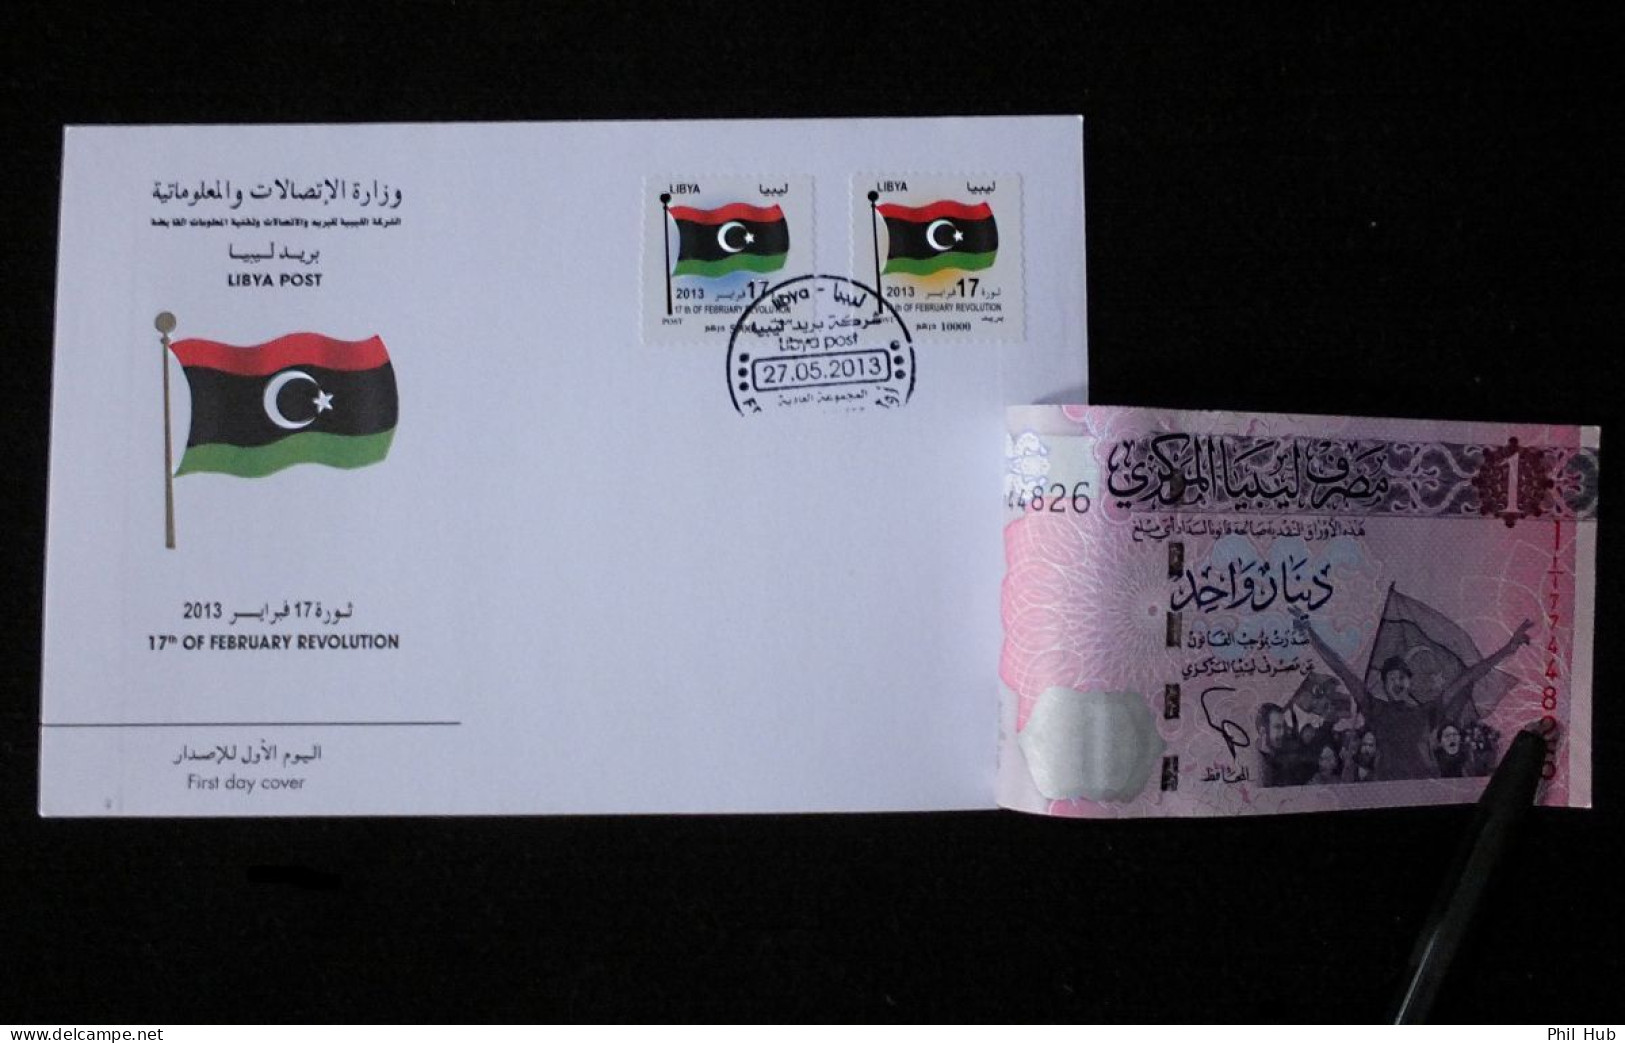 LIBYA 2013 "The Revolution FDC" NEW LIBYA FLAG STAMPS And BANKNOTE On FDC - Libye